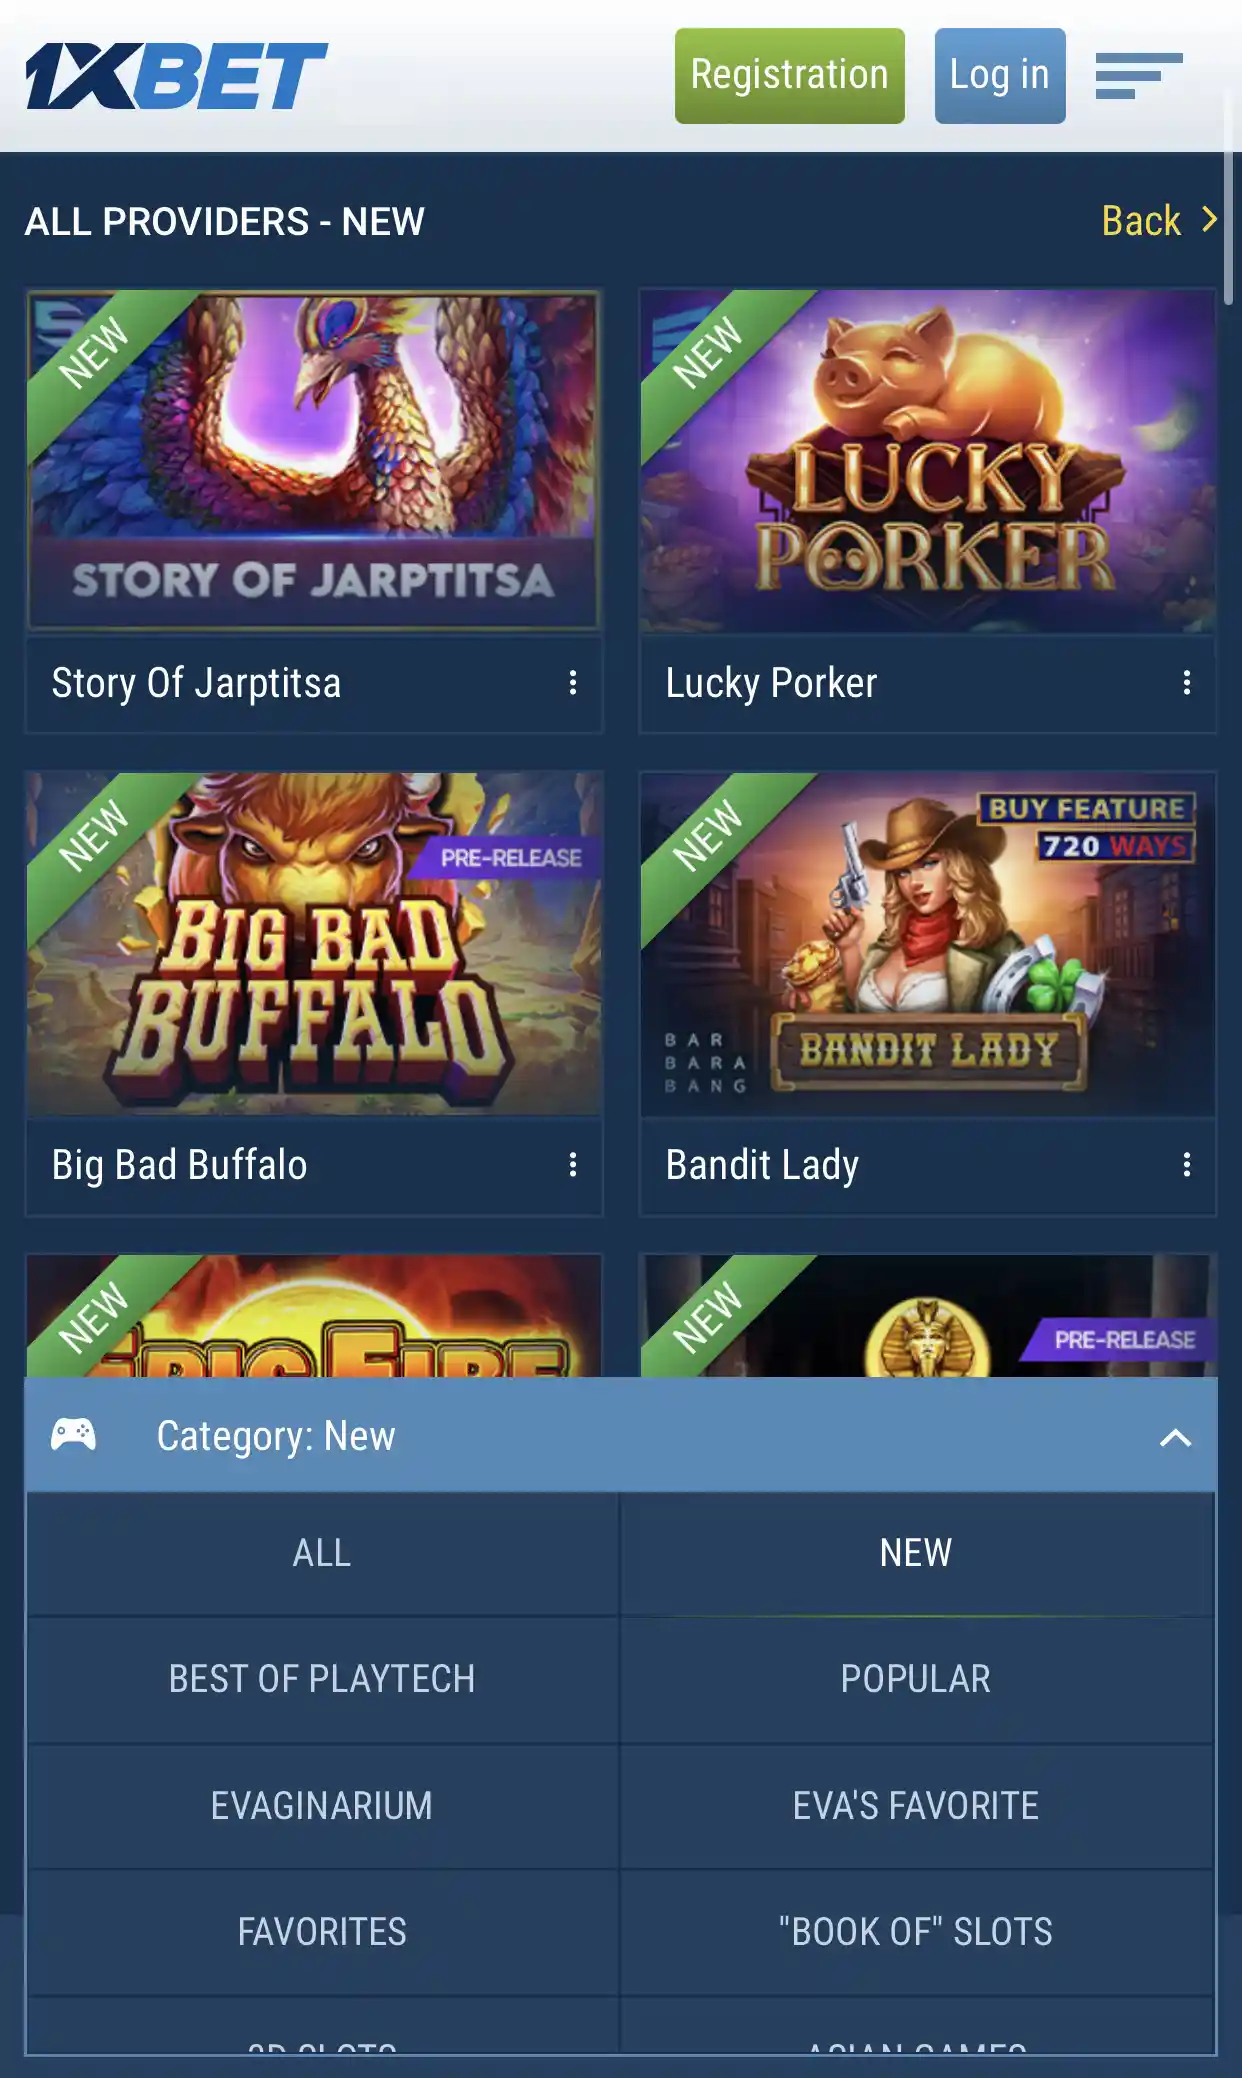 The games are categorized for the convenience of players.